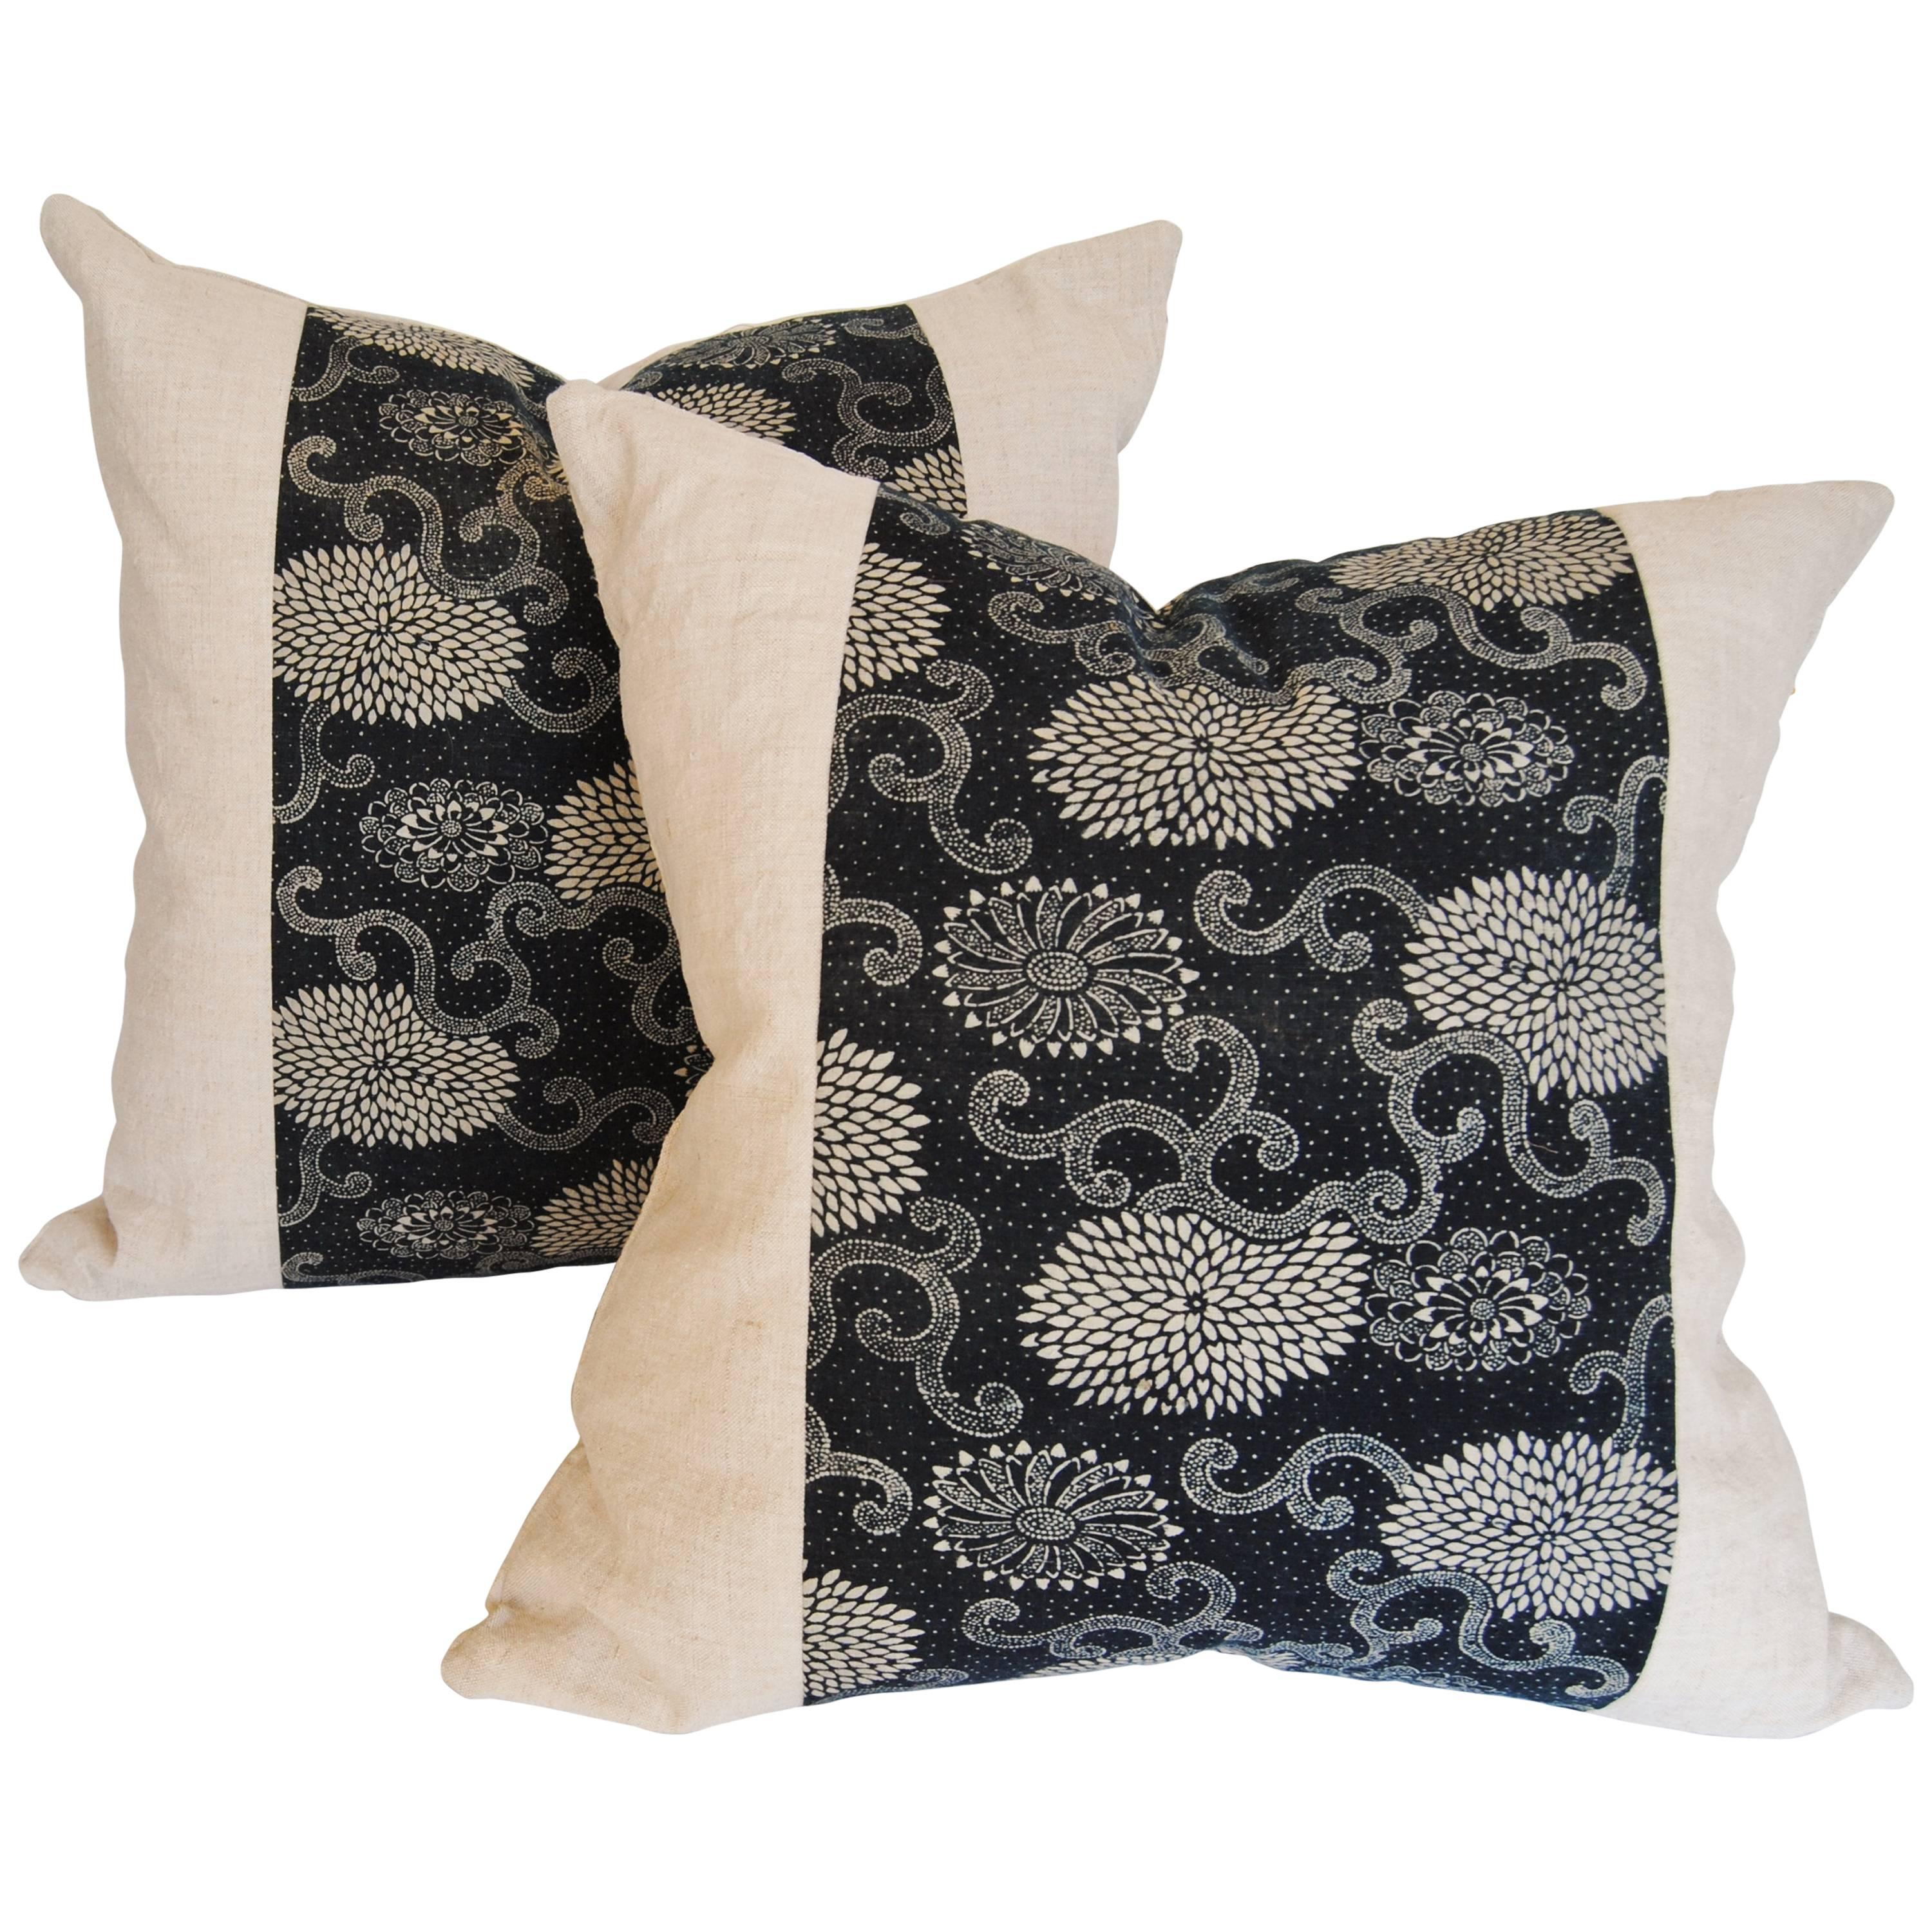 Custom Pair of Pillows Cut from an Antique Japanese Indigo Katazome Textile For Sale